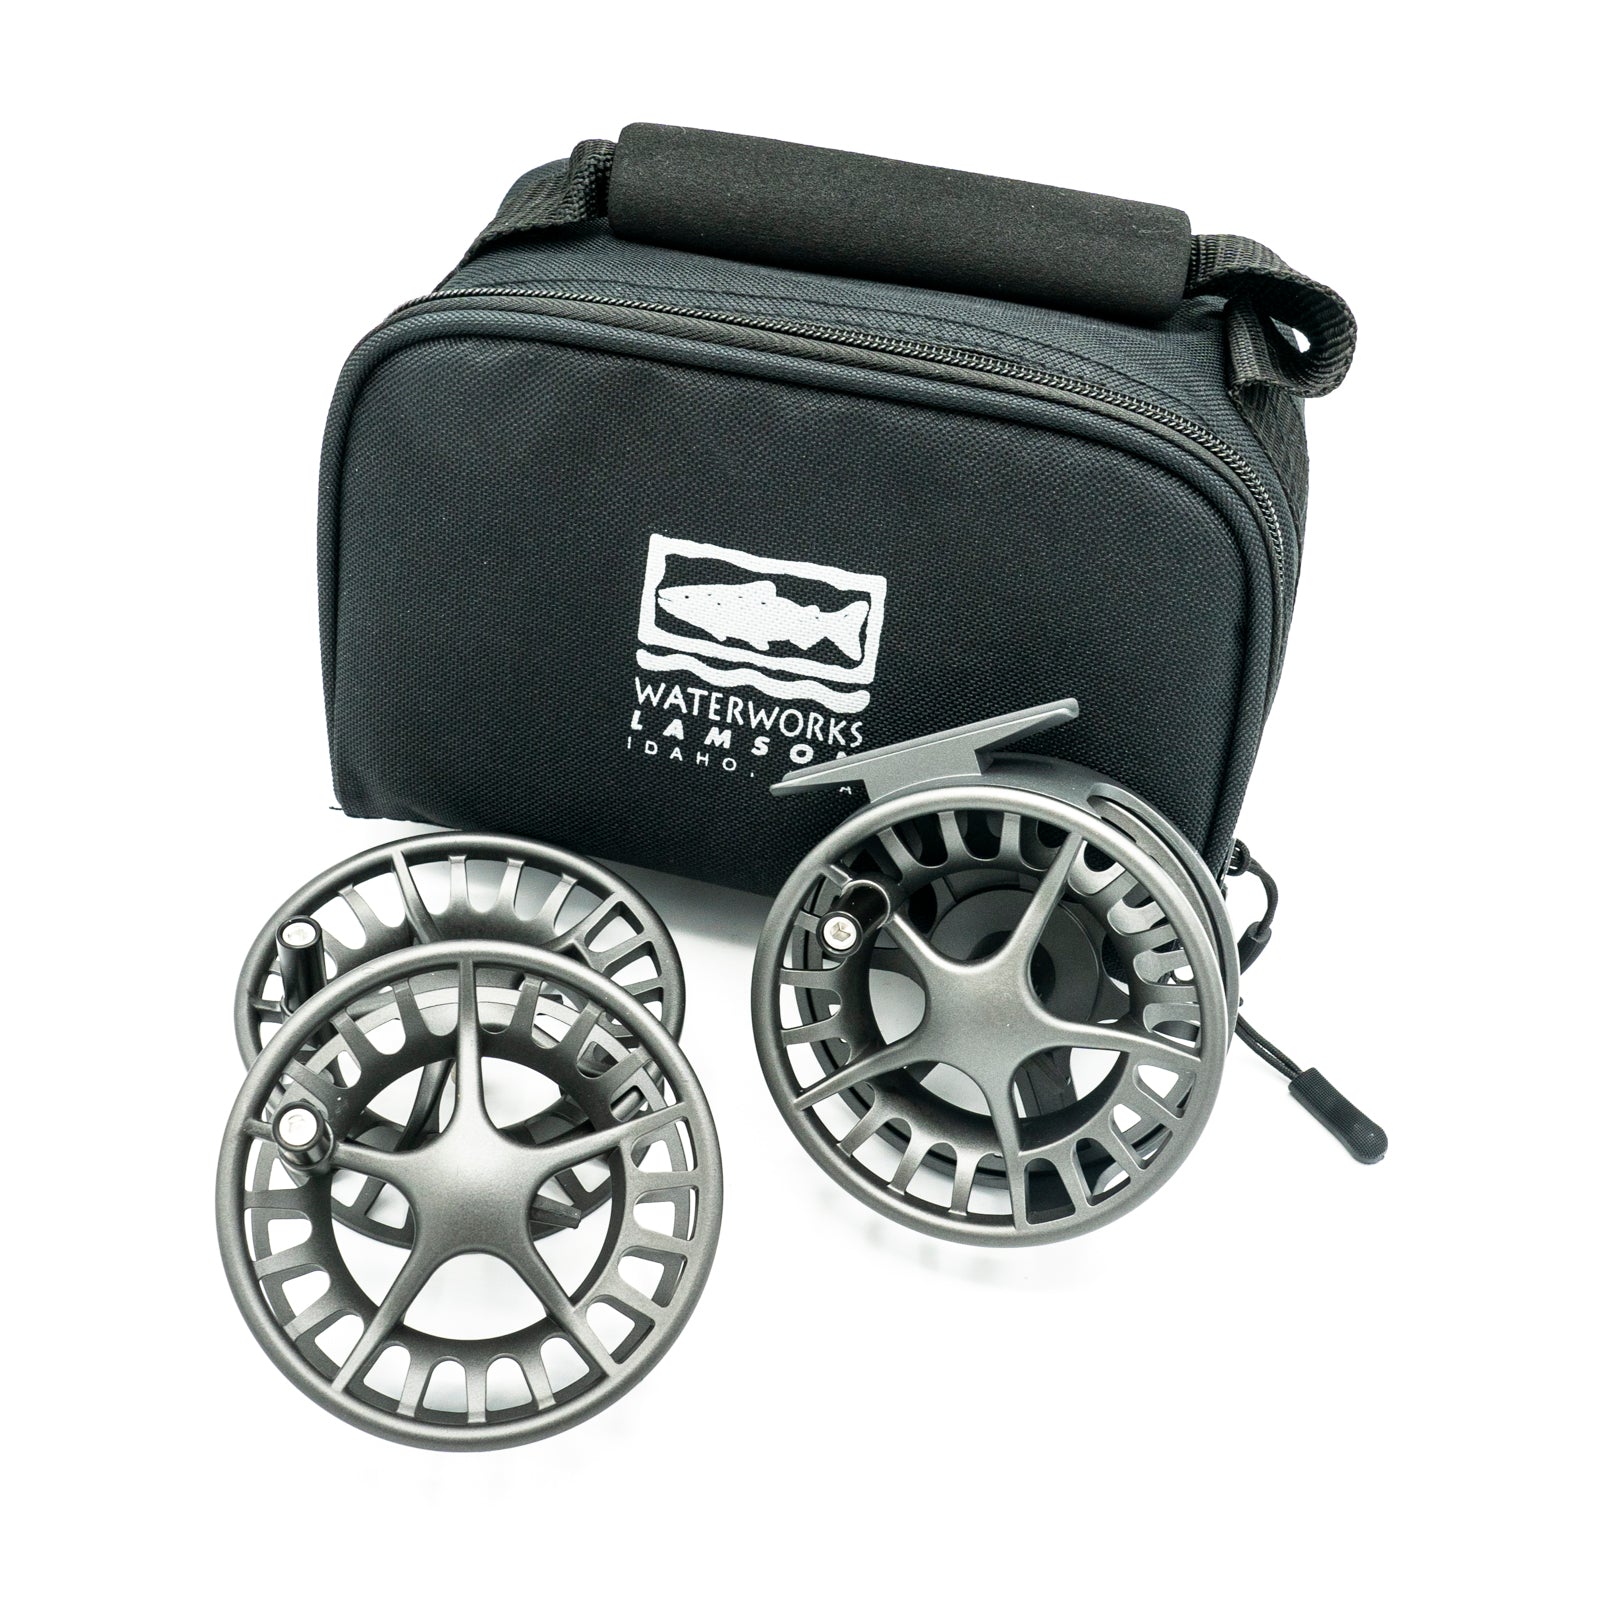 The 3-pack is an extreme value; it includes one reel and two spare spools in a nylon carrying case all for the price of one reel and one spool. This new product offers beneficial interchangeability at ease for the multi-faceted angler.